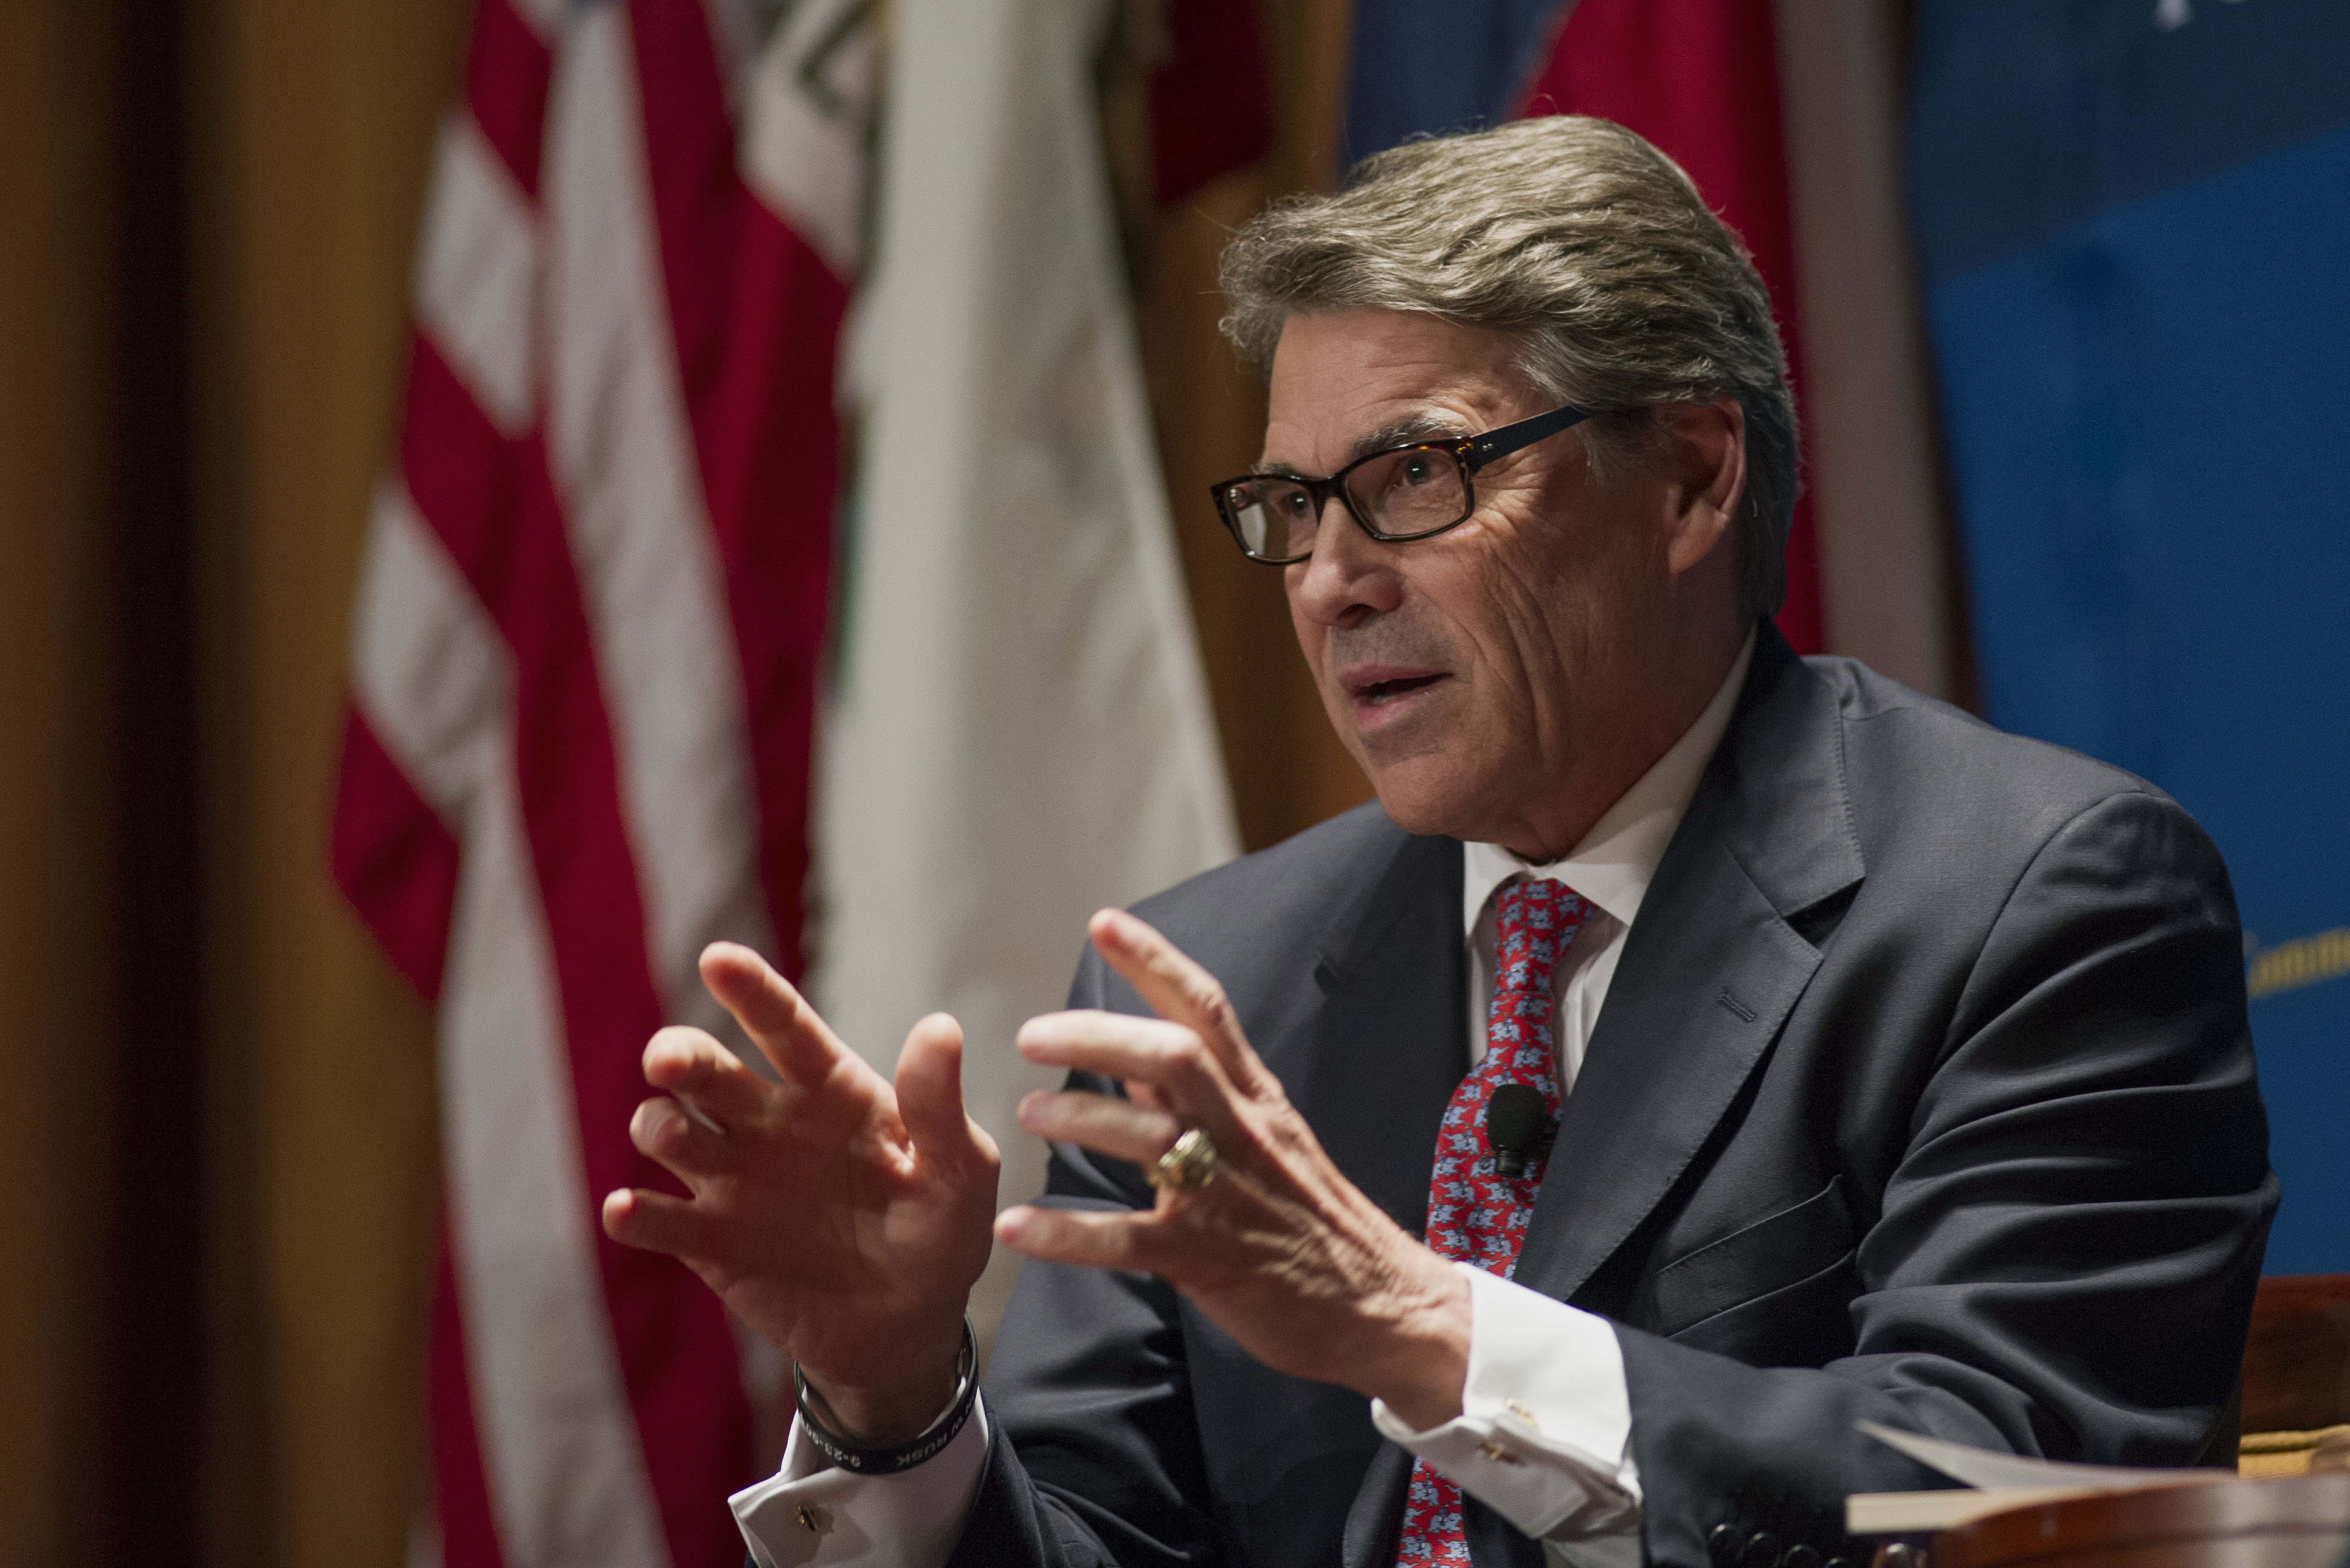 Rick Perry, governor of Texas, speaks at the Commonwealth Club of California in San Francisco, California, U.S., on Wednesday, June 11, 2014. (David Paul Morris—Bloomberg via Getty Images)